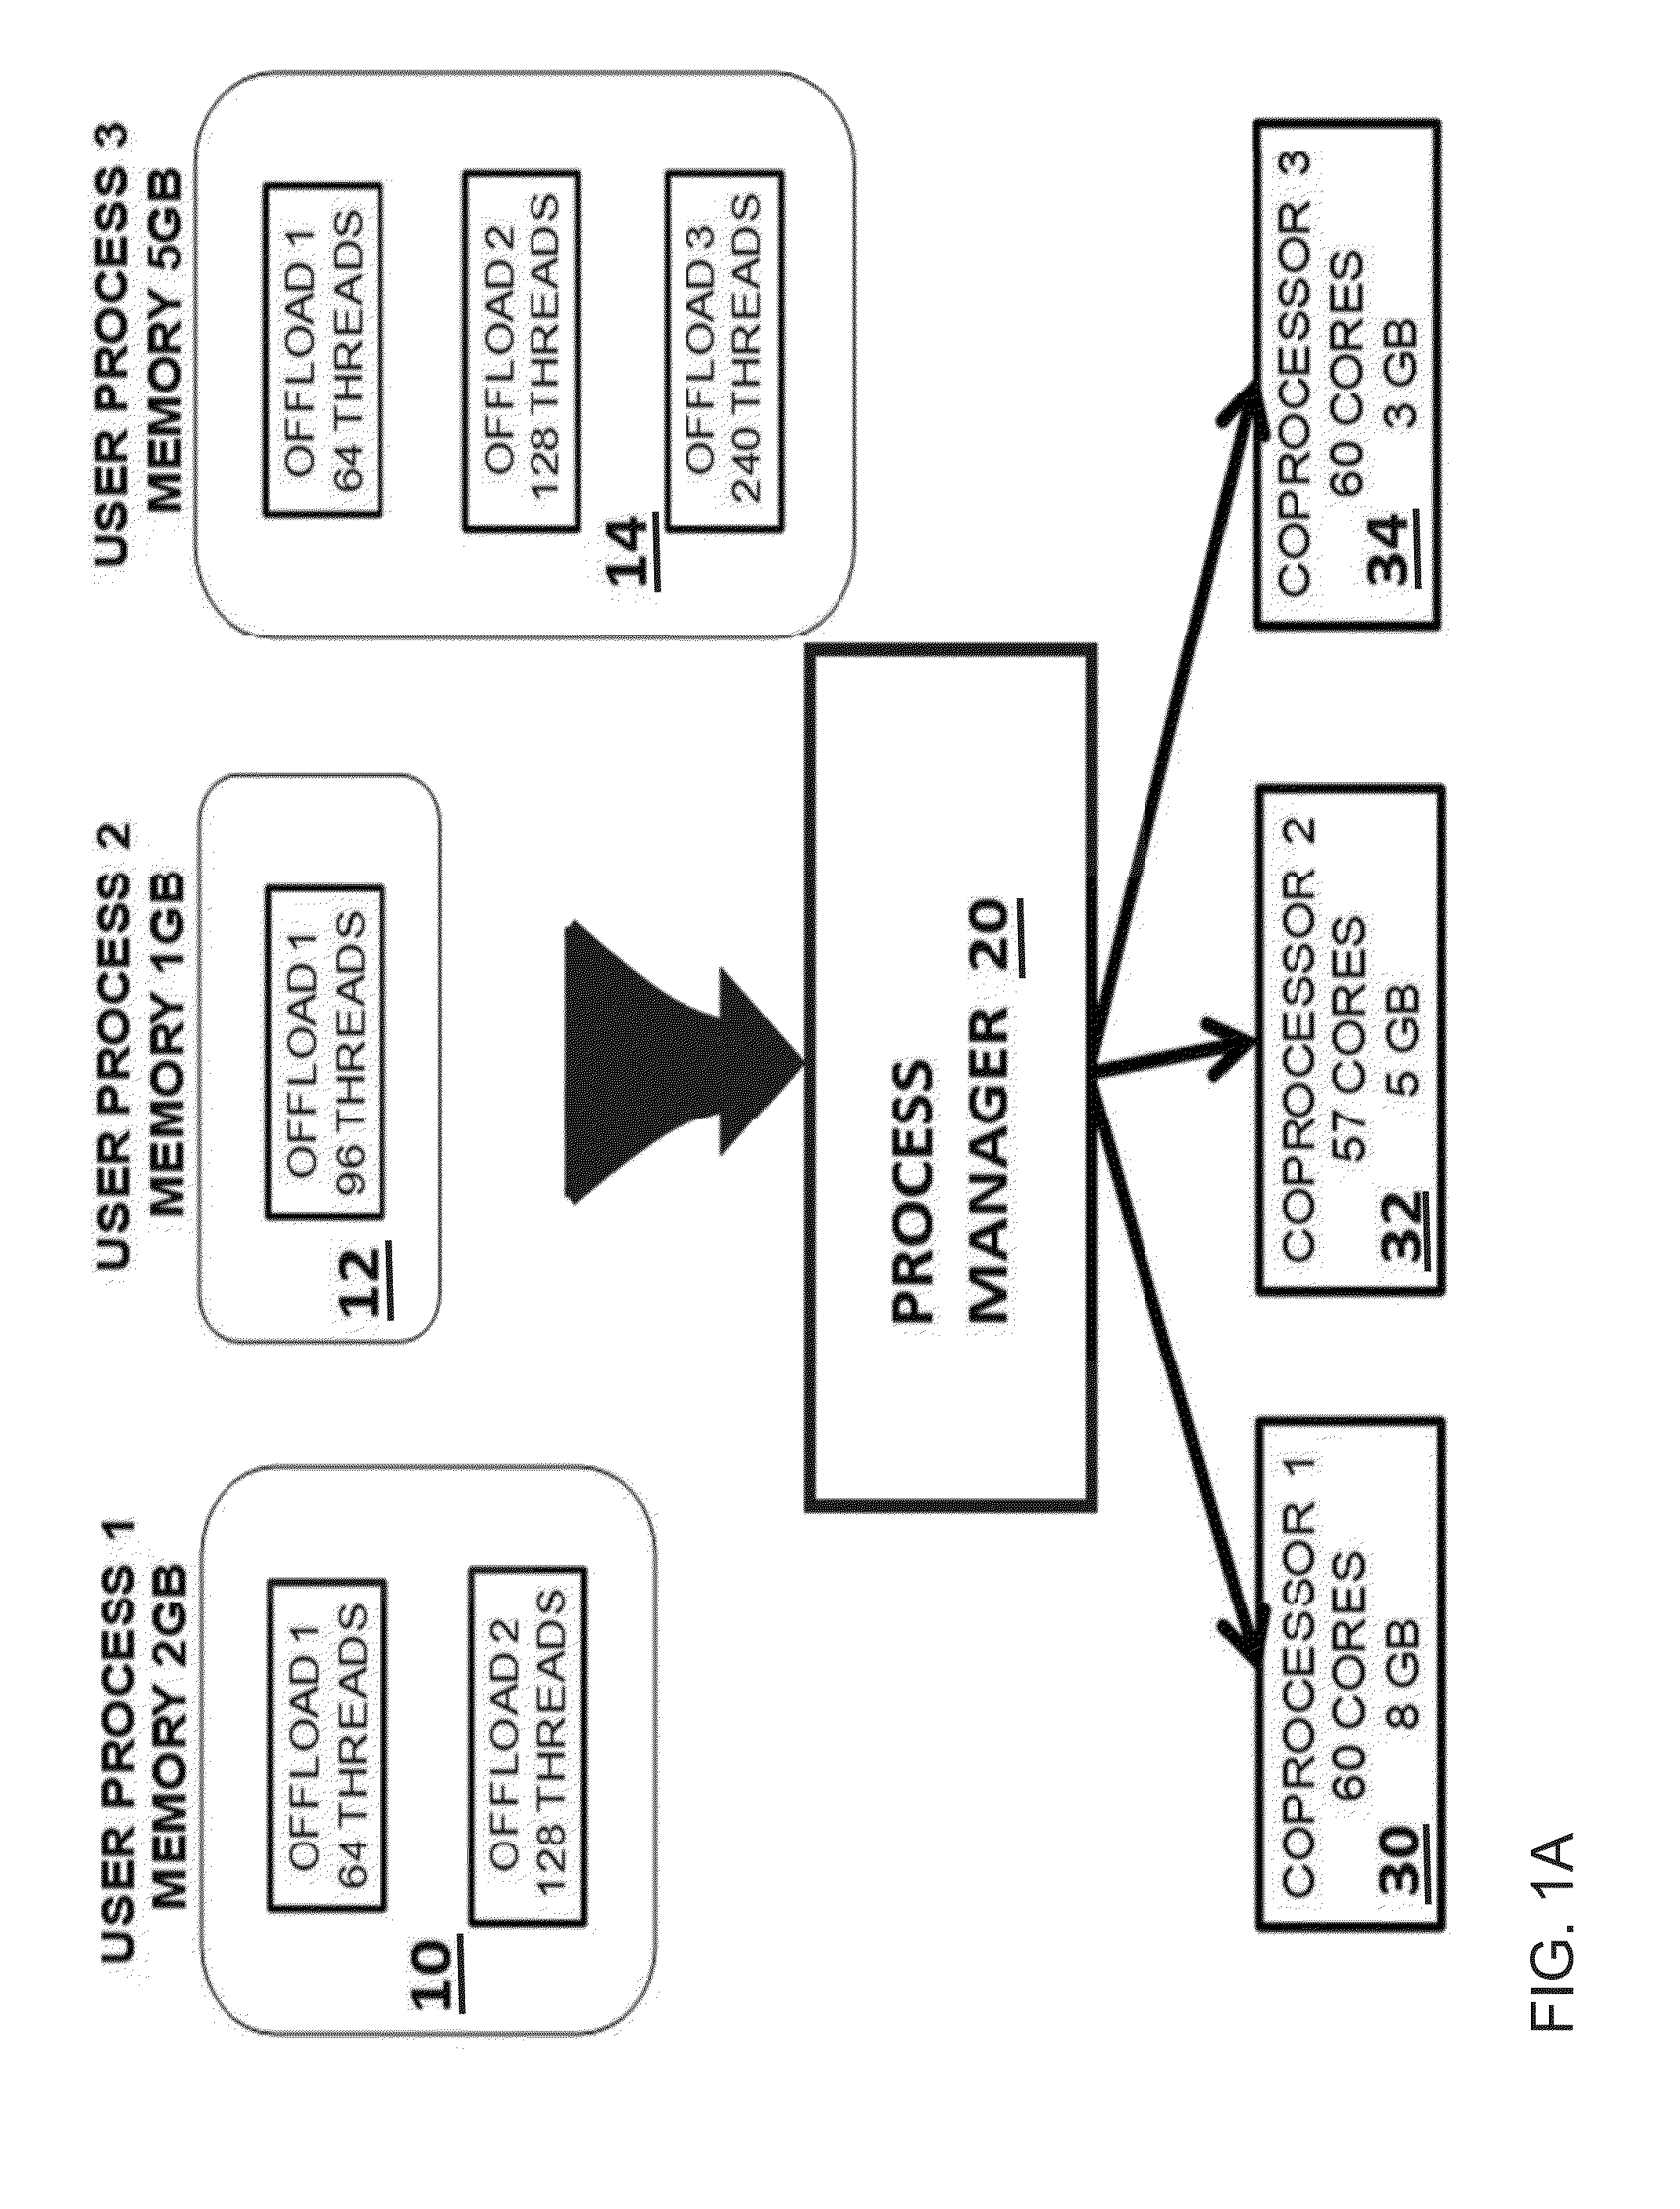 Simultaneous scheduling of processes and offloading computation on many-core coprocessors